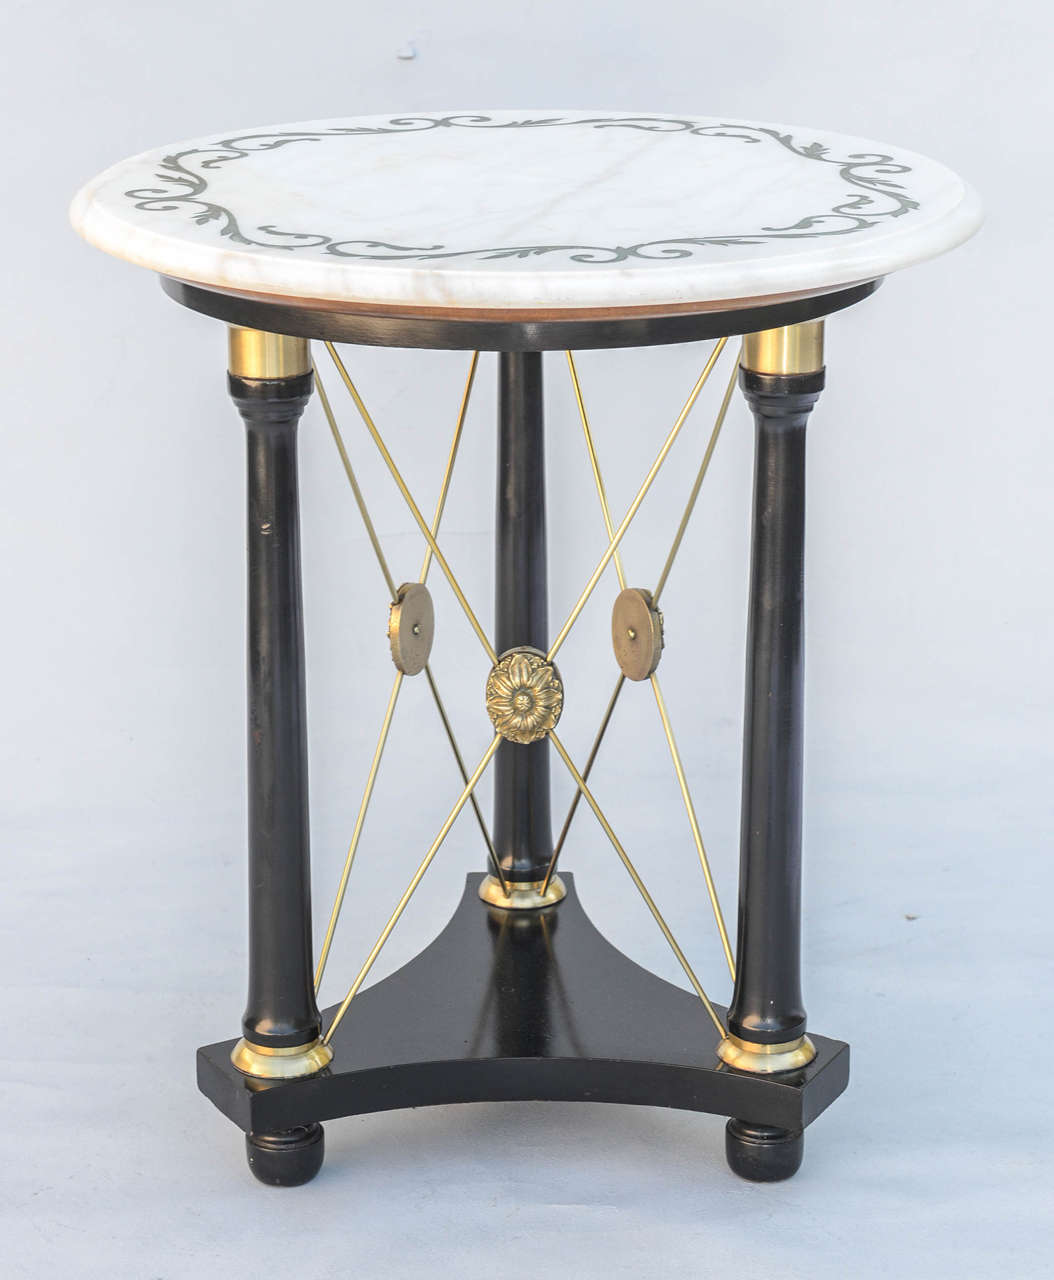 Unusual occasional or end table, in Regency taste, having a lacquered finish; its round top of Carrara marble etched with scrollwork border, on a trio of brass-capped column legs, joined by X-frame crossed brass bars, each centered with a stylized